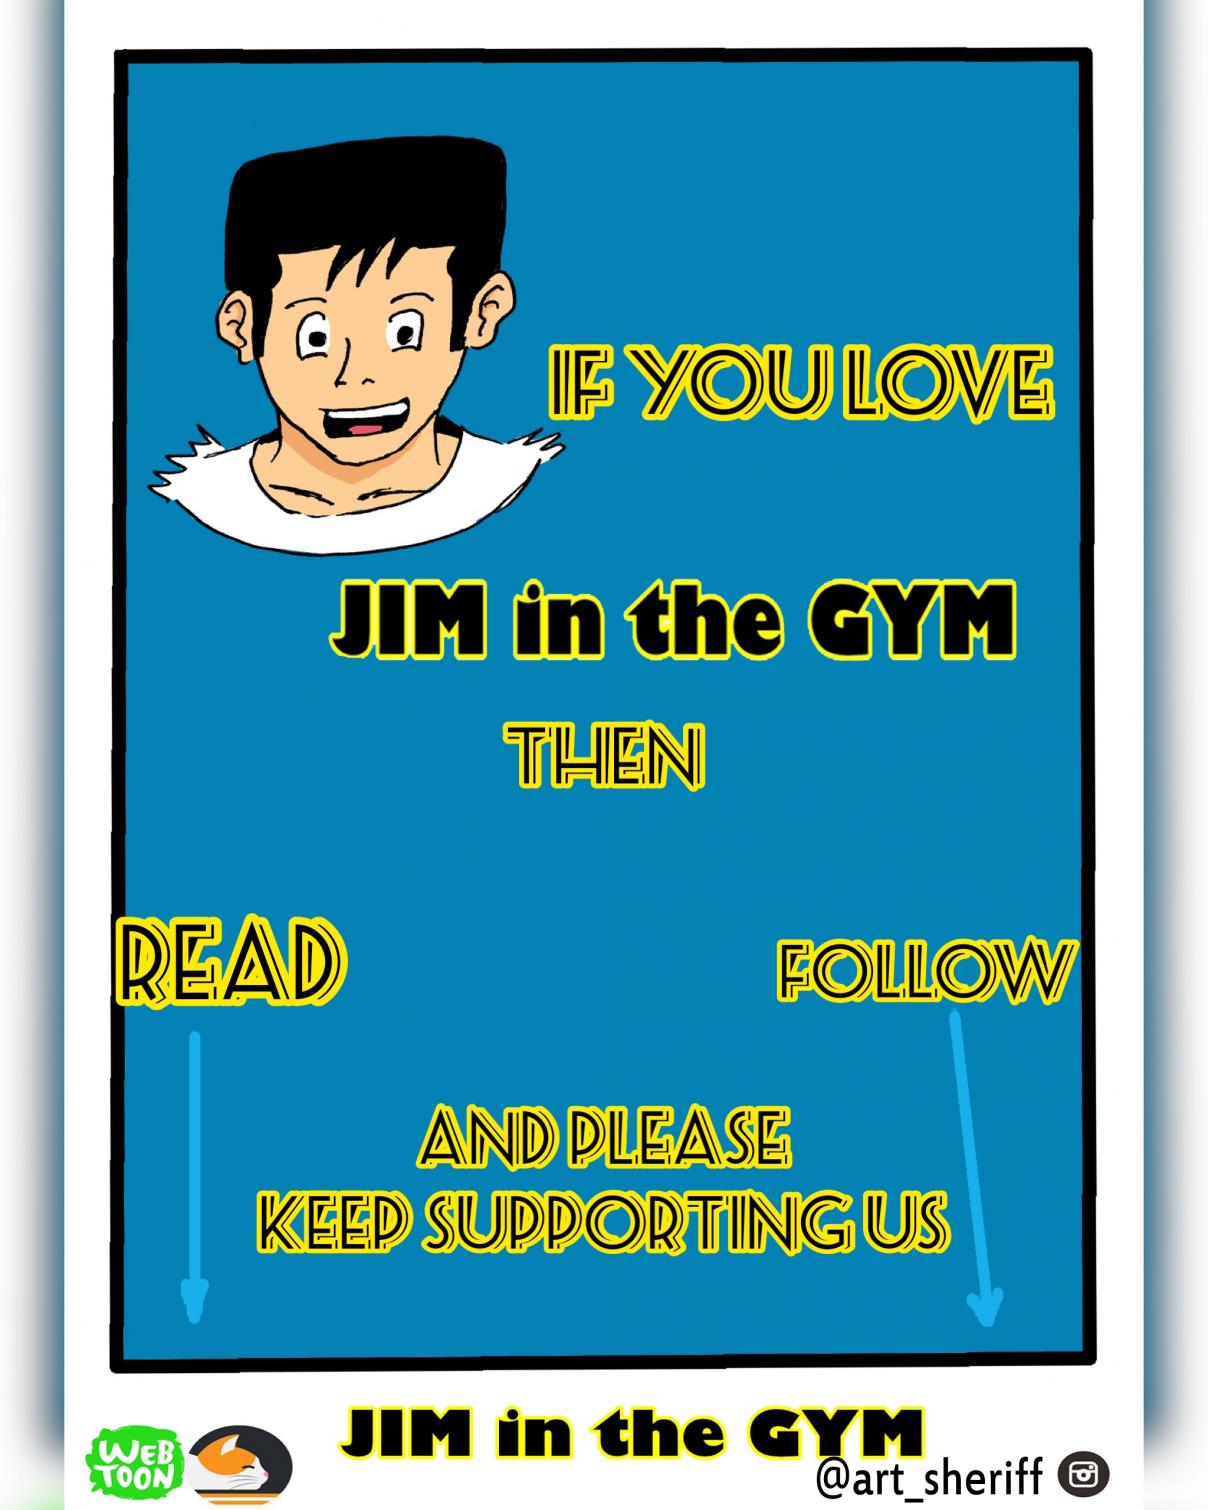 Jim in the Gym Vol. 1 Ch. 21.1 Friday Q&A's #3 Pt.2